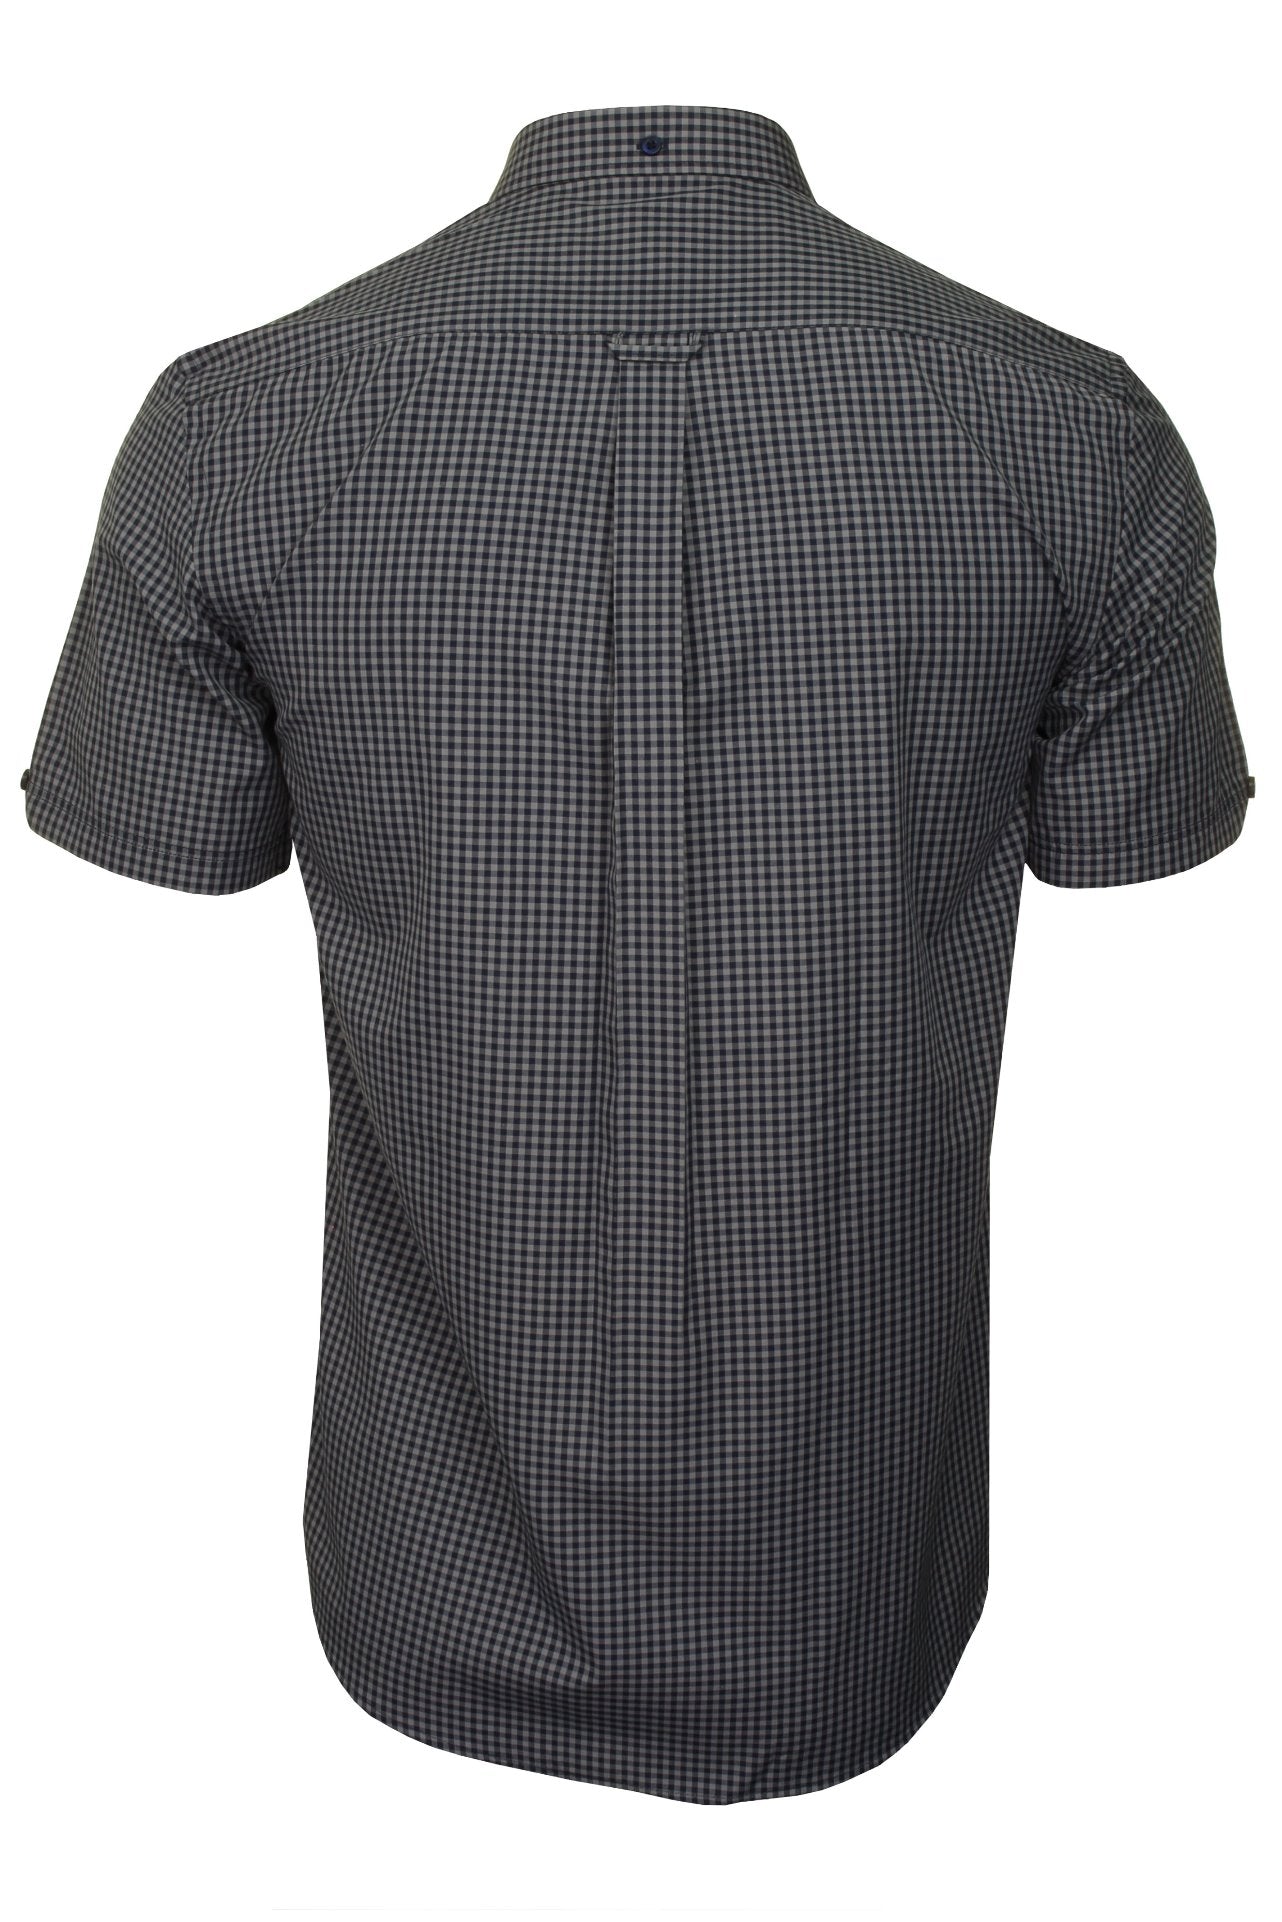 Xact Men's Gingham Check Shirt with Button-Down Collar - Short Sleeved-3